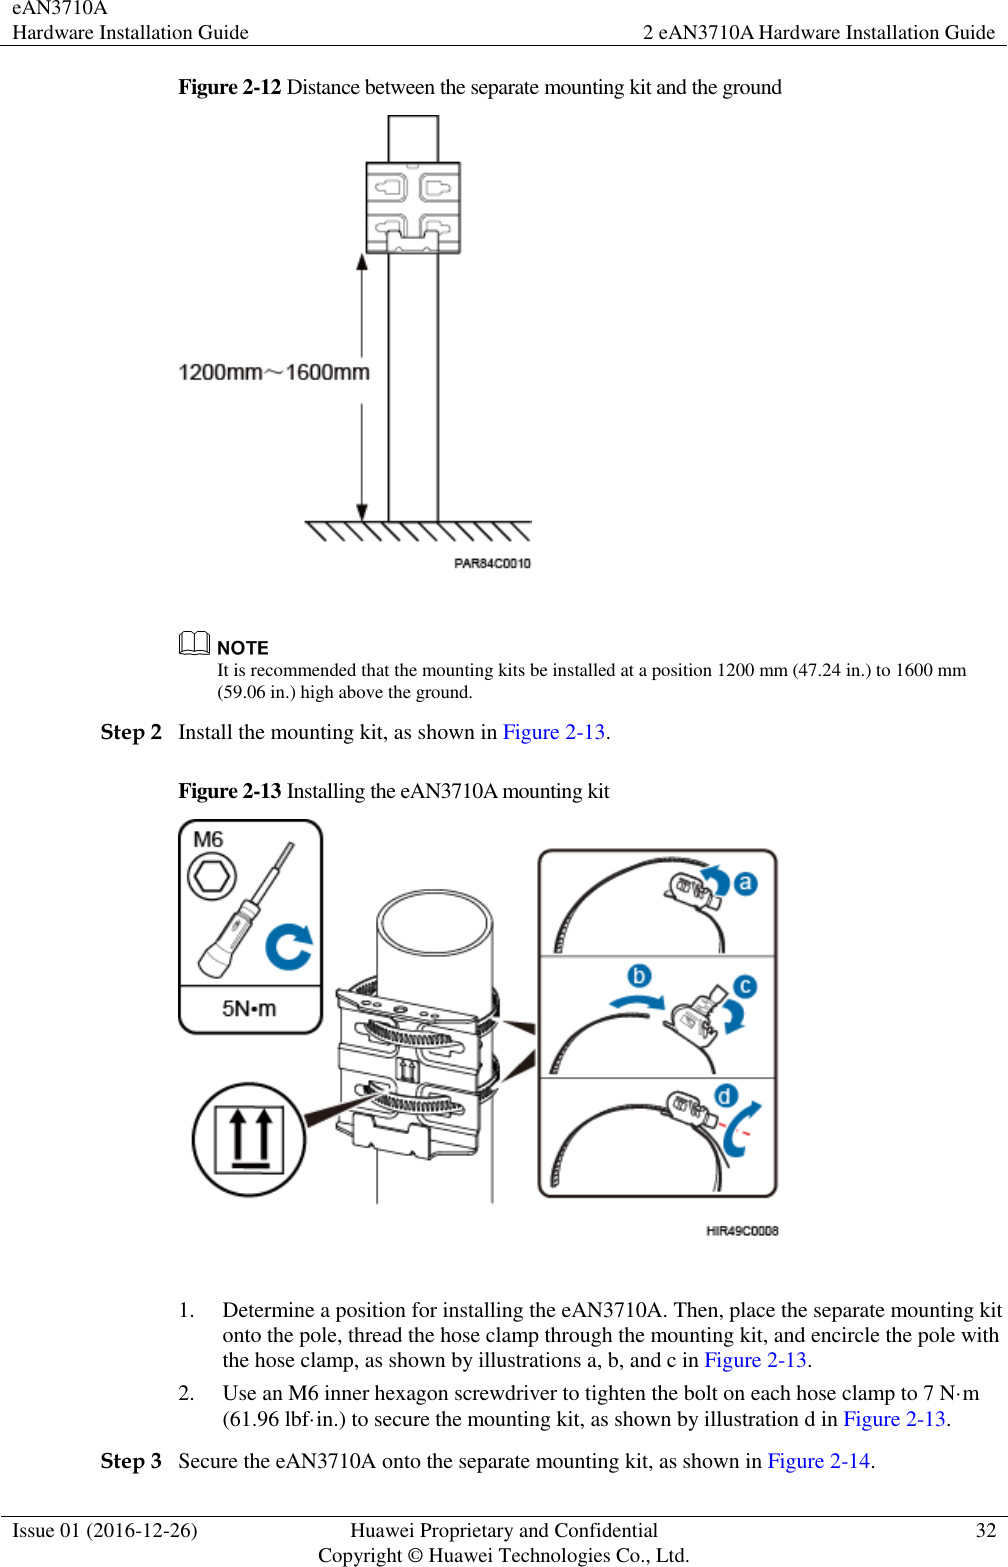 eAN3710A Hardware Installation Guide 2 eAN3710A Hardware Installation Guide  Issue 01 (2016-12-26) Huawei Proprietary and Confidential                                     Copyright © Huawei Technologies Co., Ltd. 32  Figure 2-12 Distance between the separate mounting kit and the ground    It is recommended that the mounting kits be installed at a position 1200 mm (47.24 in.) to 1600 mm (59.06 in.) high above the ground.   Step 2 Install the mounting kit, as shown in Figure 2-13. Figure 2-13 Installing the eAN3710A mounting kit   1. Determine a position for installing the eAN3710A. Then, place the separate mounting kit onto the pole, thread the hose clamp through the mounting kit, and encircle the pole with the hose clamp, as shown by illustrations a, b, and c in Figure 2-13. 2. Use an M6 inner hexagon screwdriver to tighten the bolt on each hose clamp to 7 N·m (61.96 lbf·in.) to secure the mounting kit, as shown by illustration d in Figure 2-13. Step 3 Secure the eAN3710A onto the separate mounting kit, as shown in Figure 2-14. 